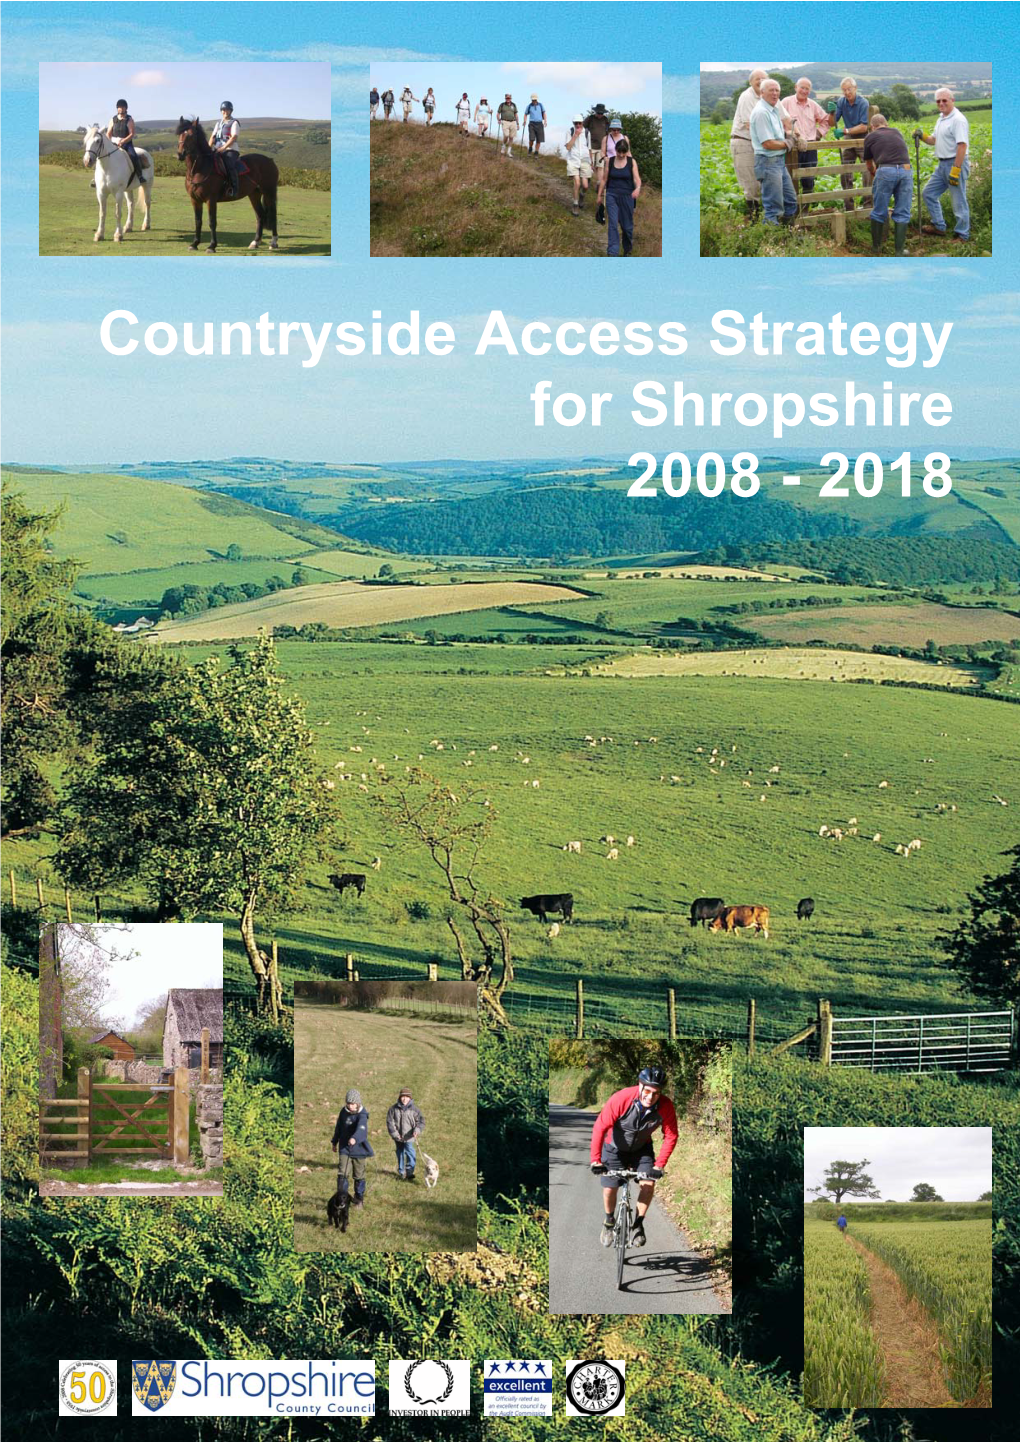 Countryside Access Strategy for Shropshire 2008-2018